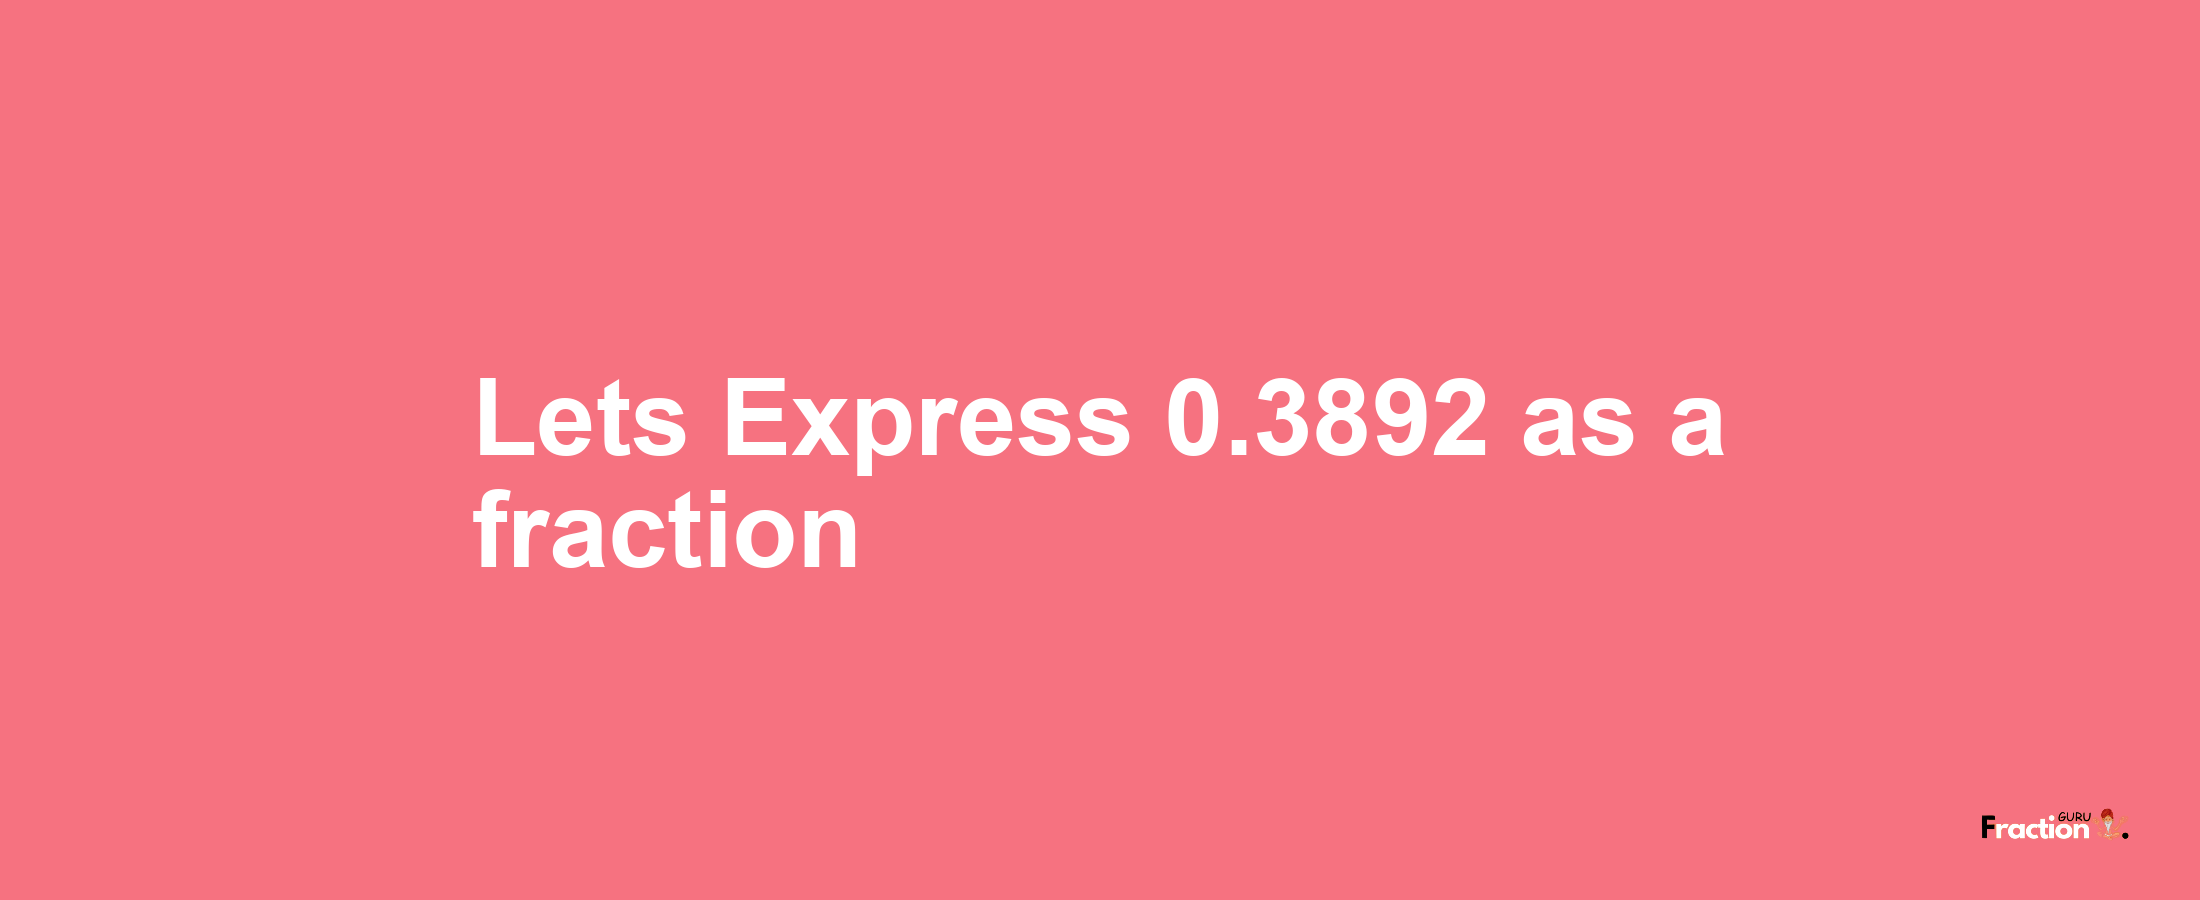 Lets Express 0.3892 as afraction